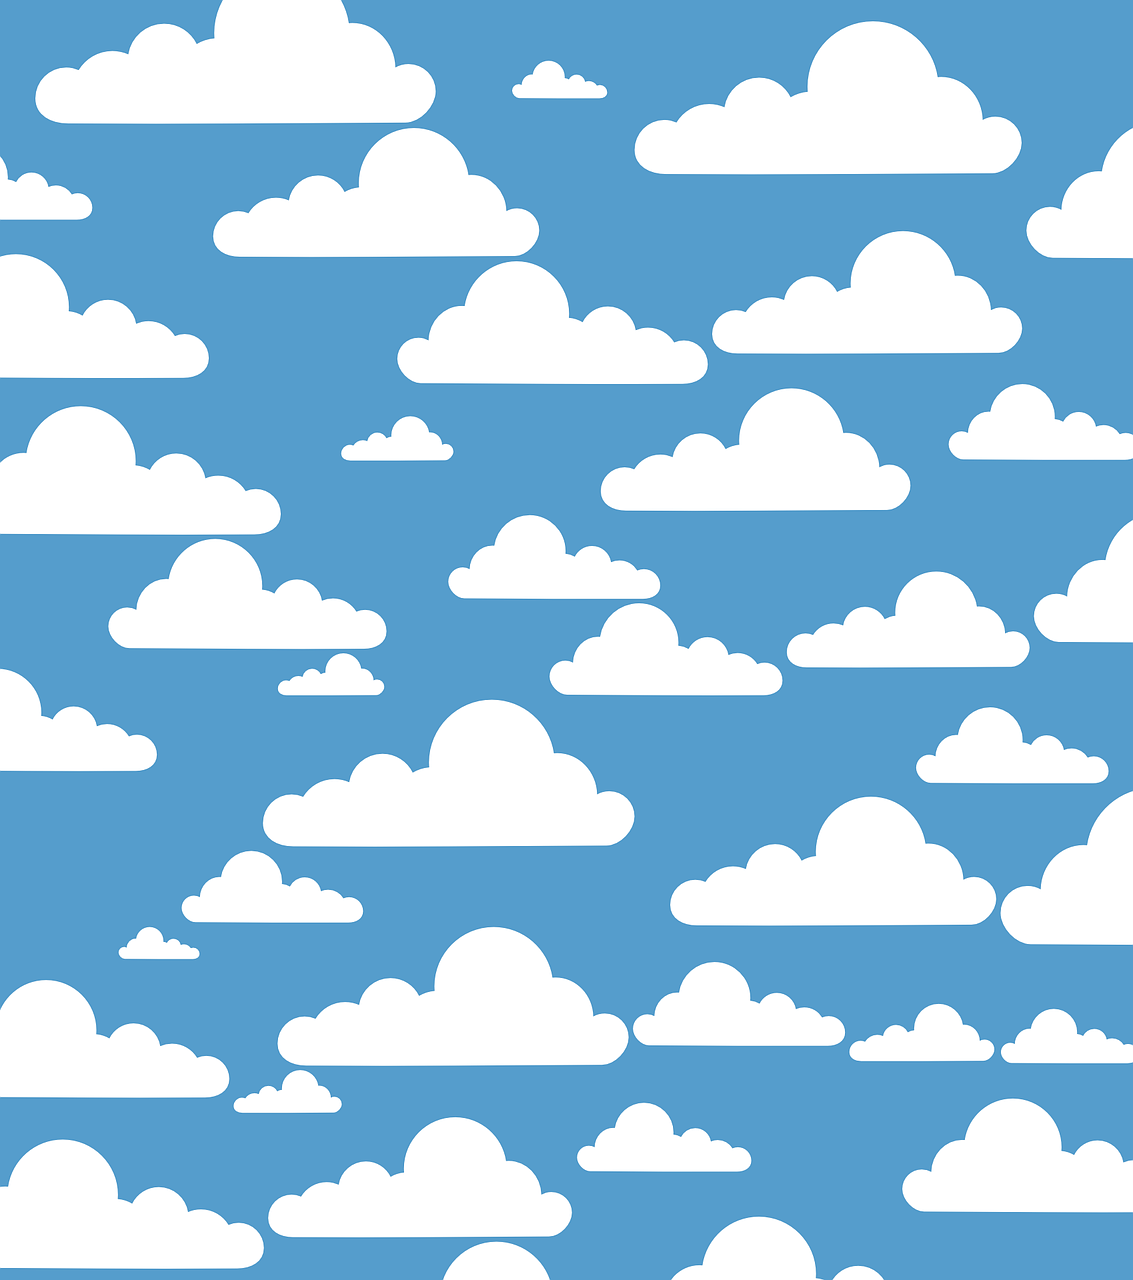 clouds,sky,blue,cumulus,white,fluffy,diagram,cloudy,free vector graphics,free pictures, free photos, free images, royalty free, free illustrations, public domain